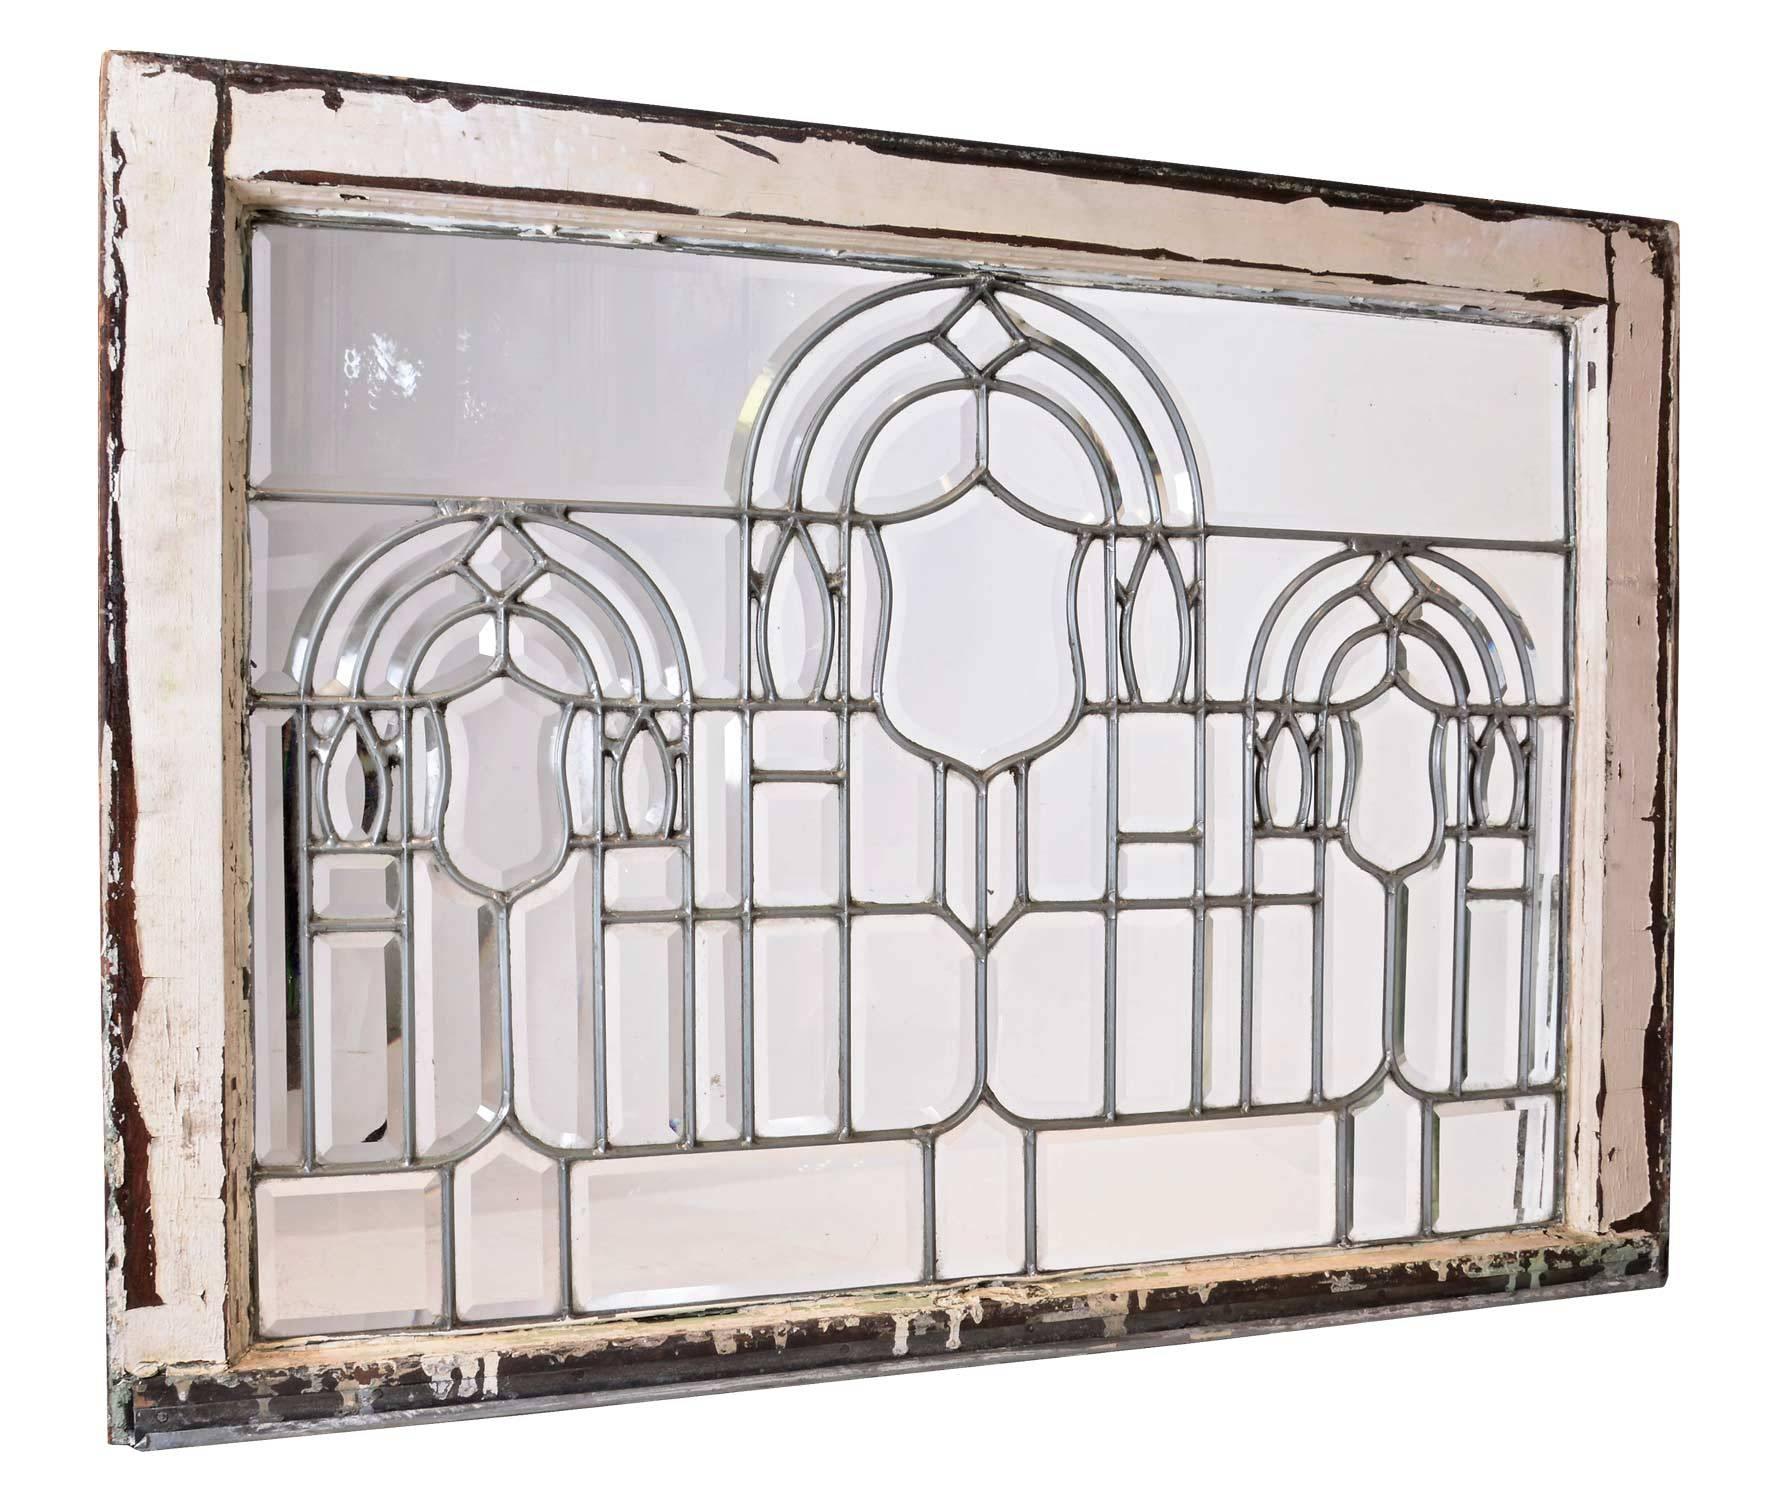 This exquisite set of windows shows a special attention to detail as each glass panel are hand cut bevels, down to the smallest 1/2